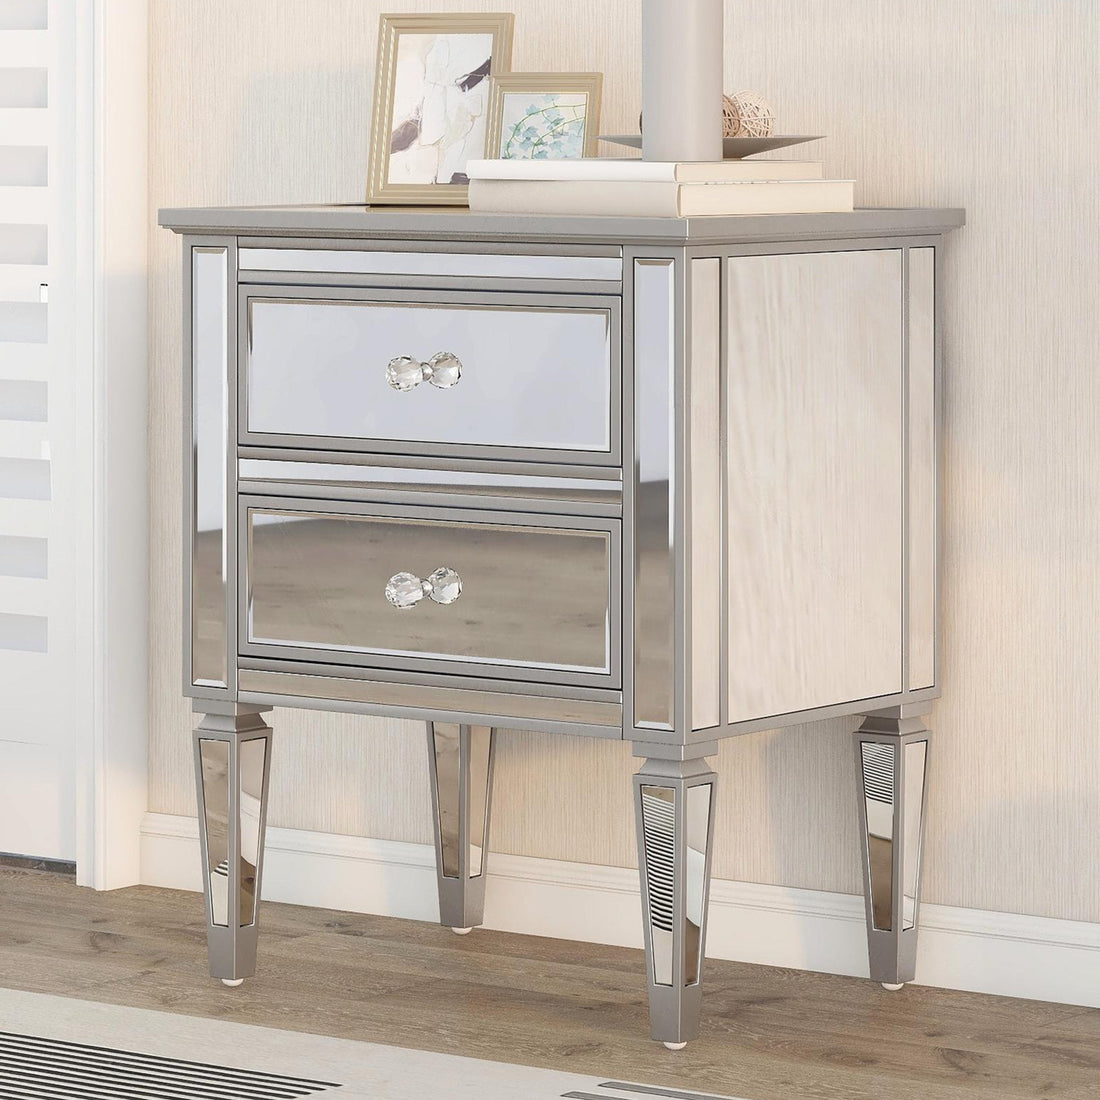 Elegant Mirrored Side Table With 2 Drawers,